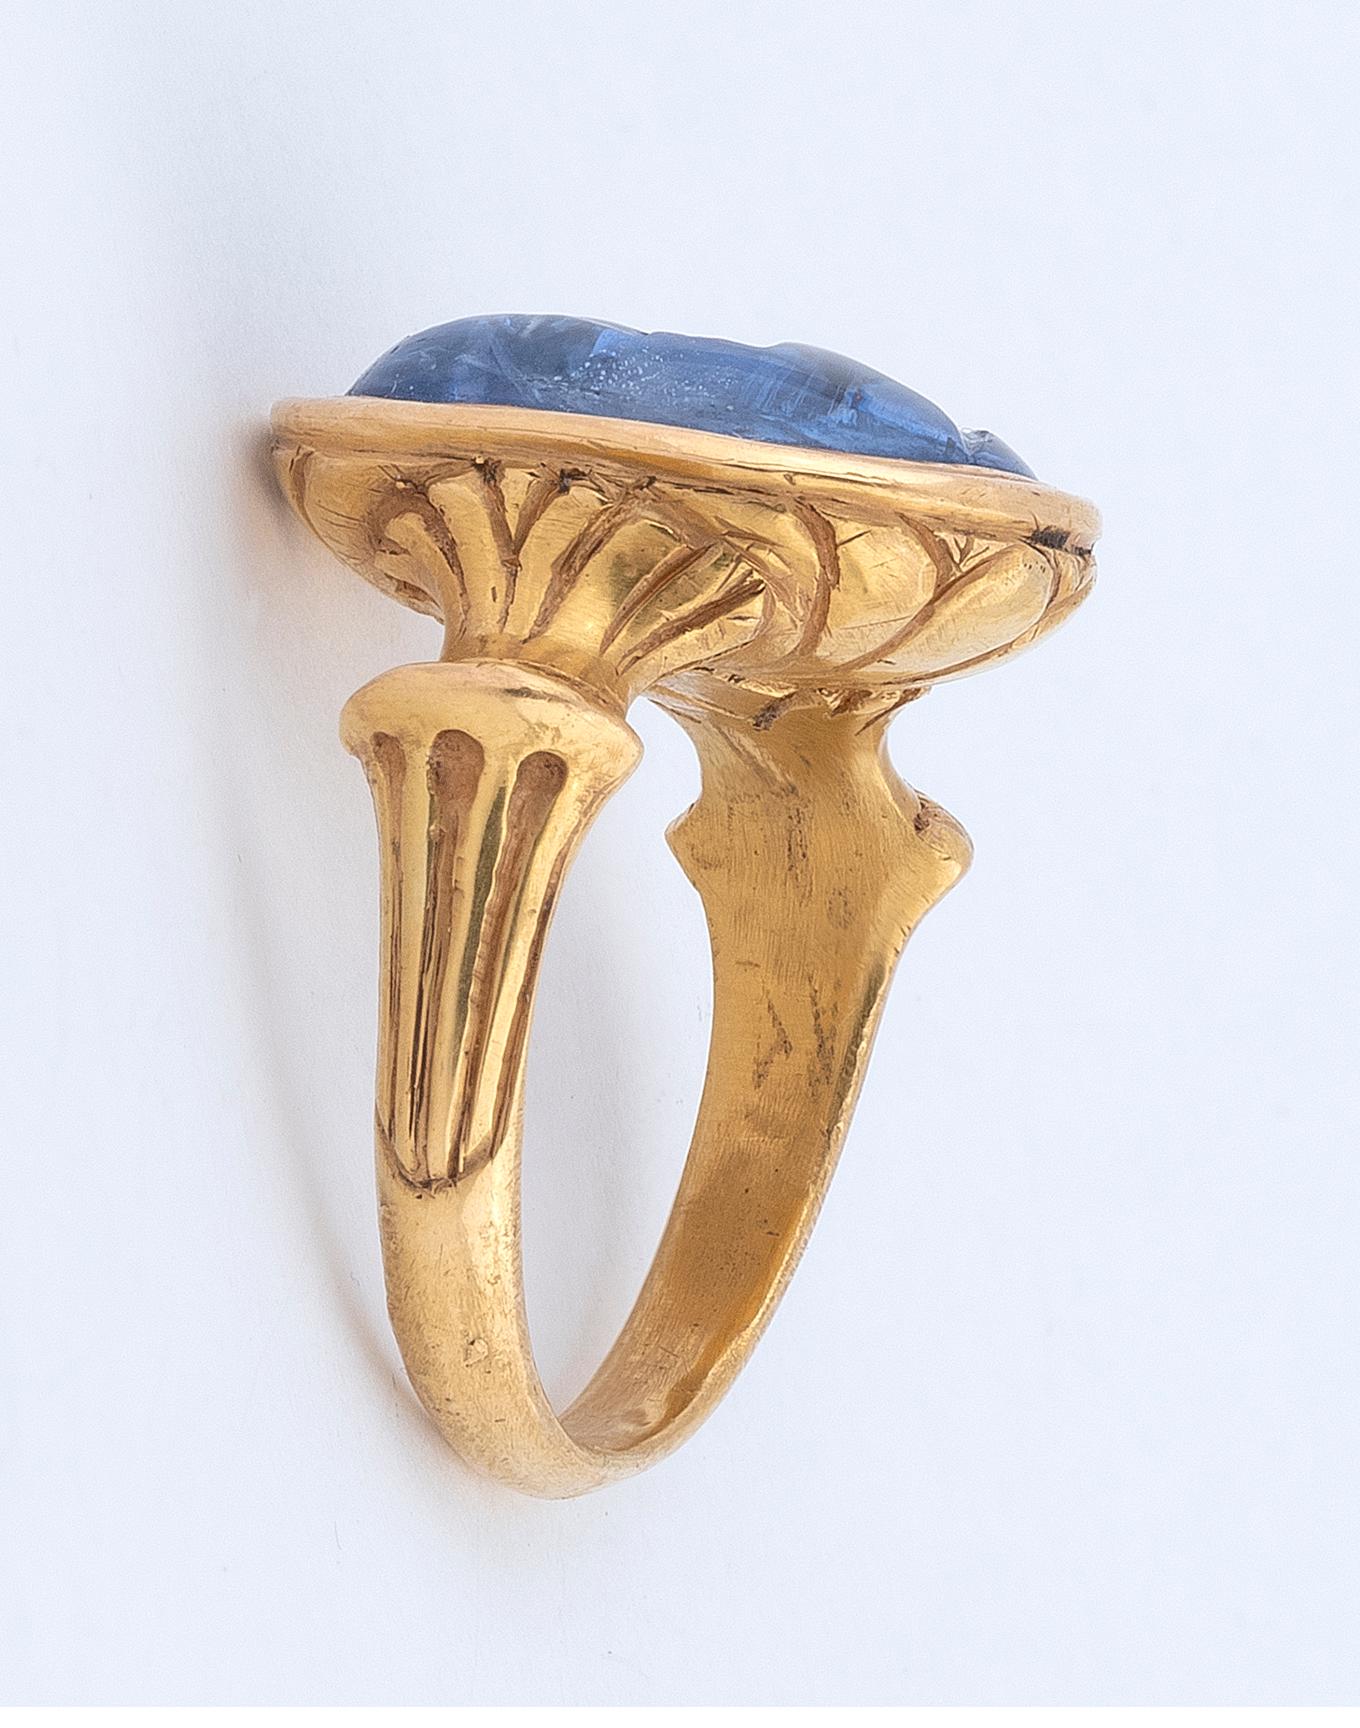 The oval-shaped sapphire carved to depict the profile of a Roman Emperor Caligola, in a closed-back setting, between foliate shoulders, 19th century composite, ring size 9 1/2
Weight : 21,20gr.
Size of bezel : 14mm x 18mm